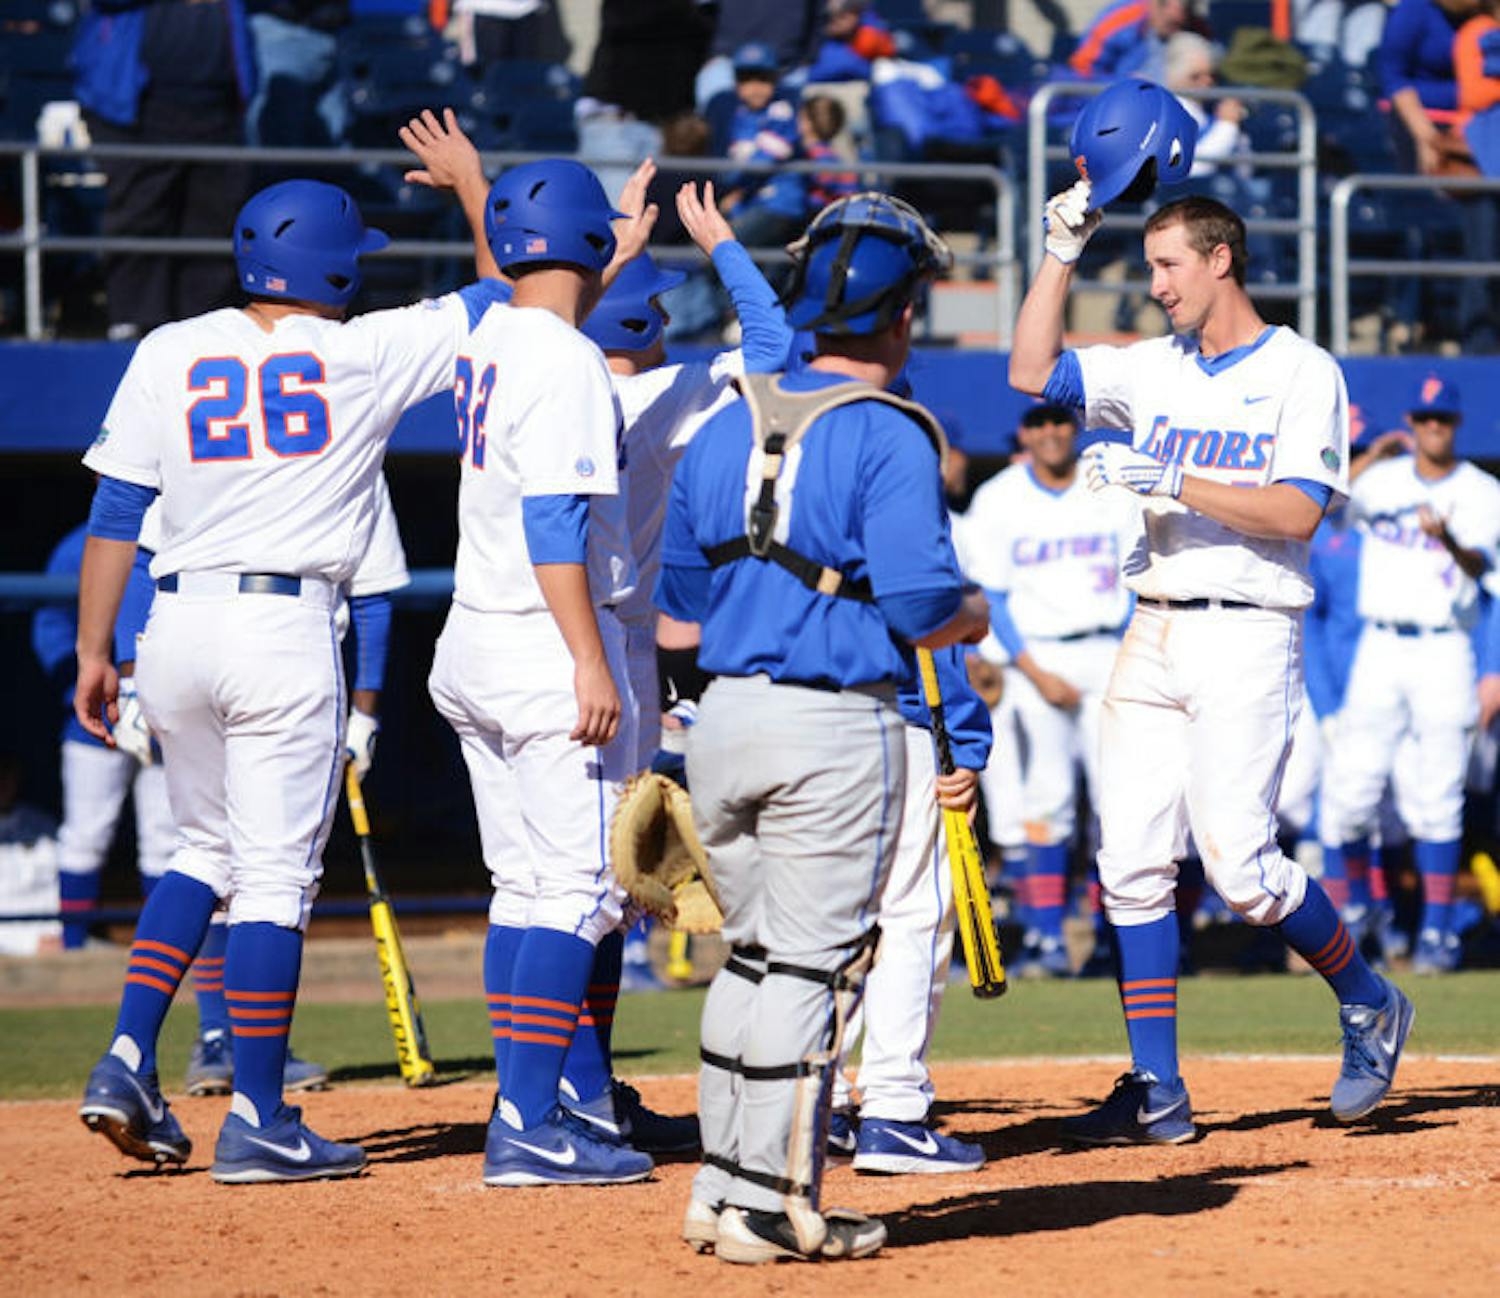 Sophomore Zack Powers is congratulated by teammates at home plate after hitting his second grand slam during Florida’s 16-5 win against Duke on Feb. 17 at McKethan Stadium.
&nbsp;